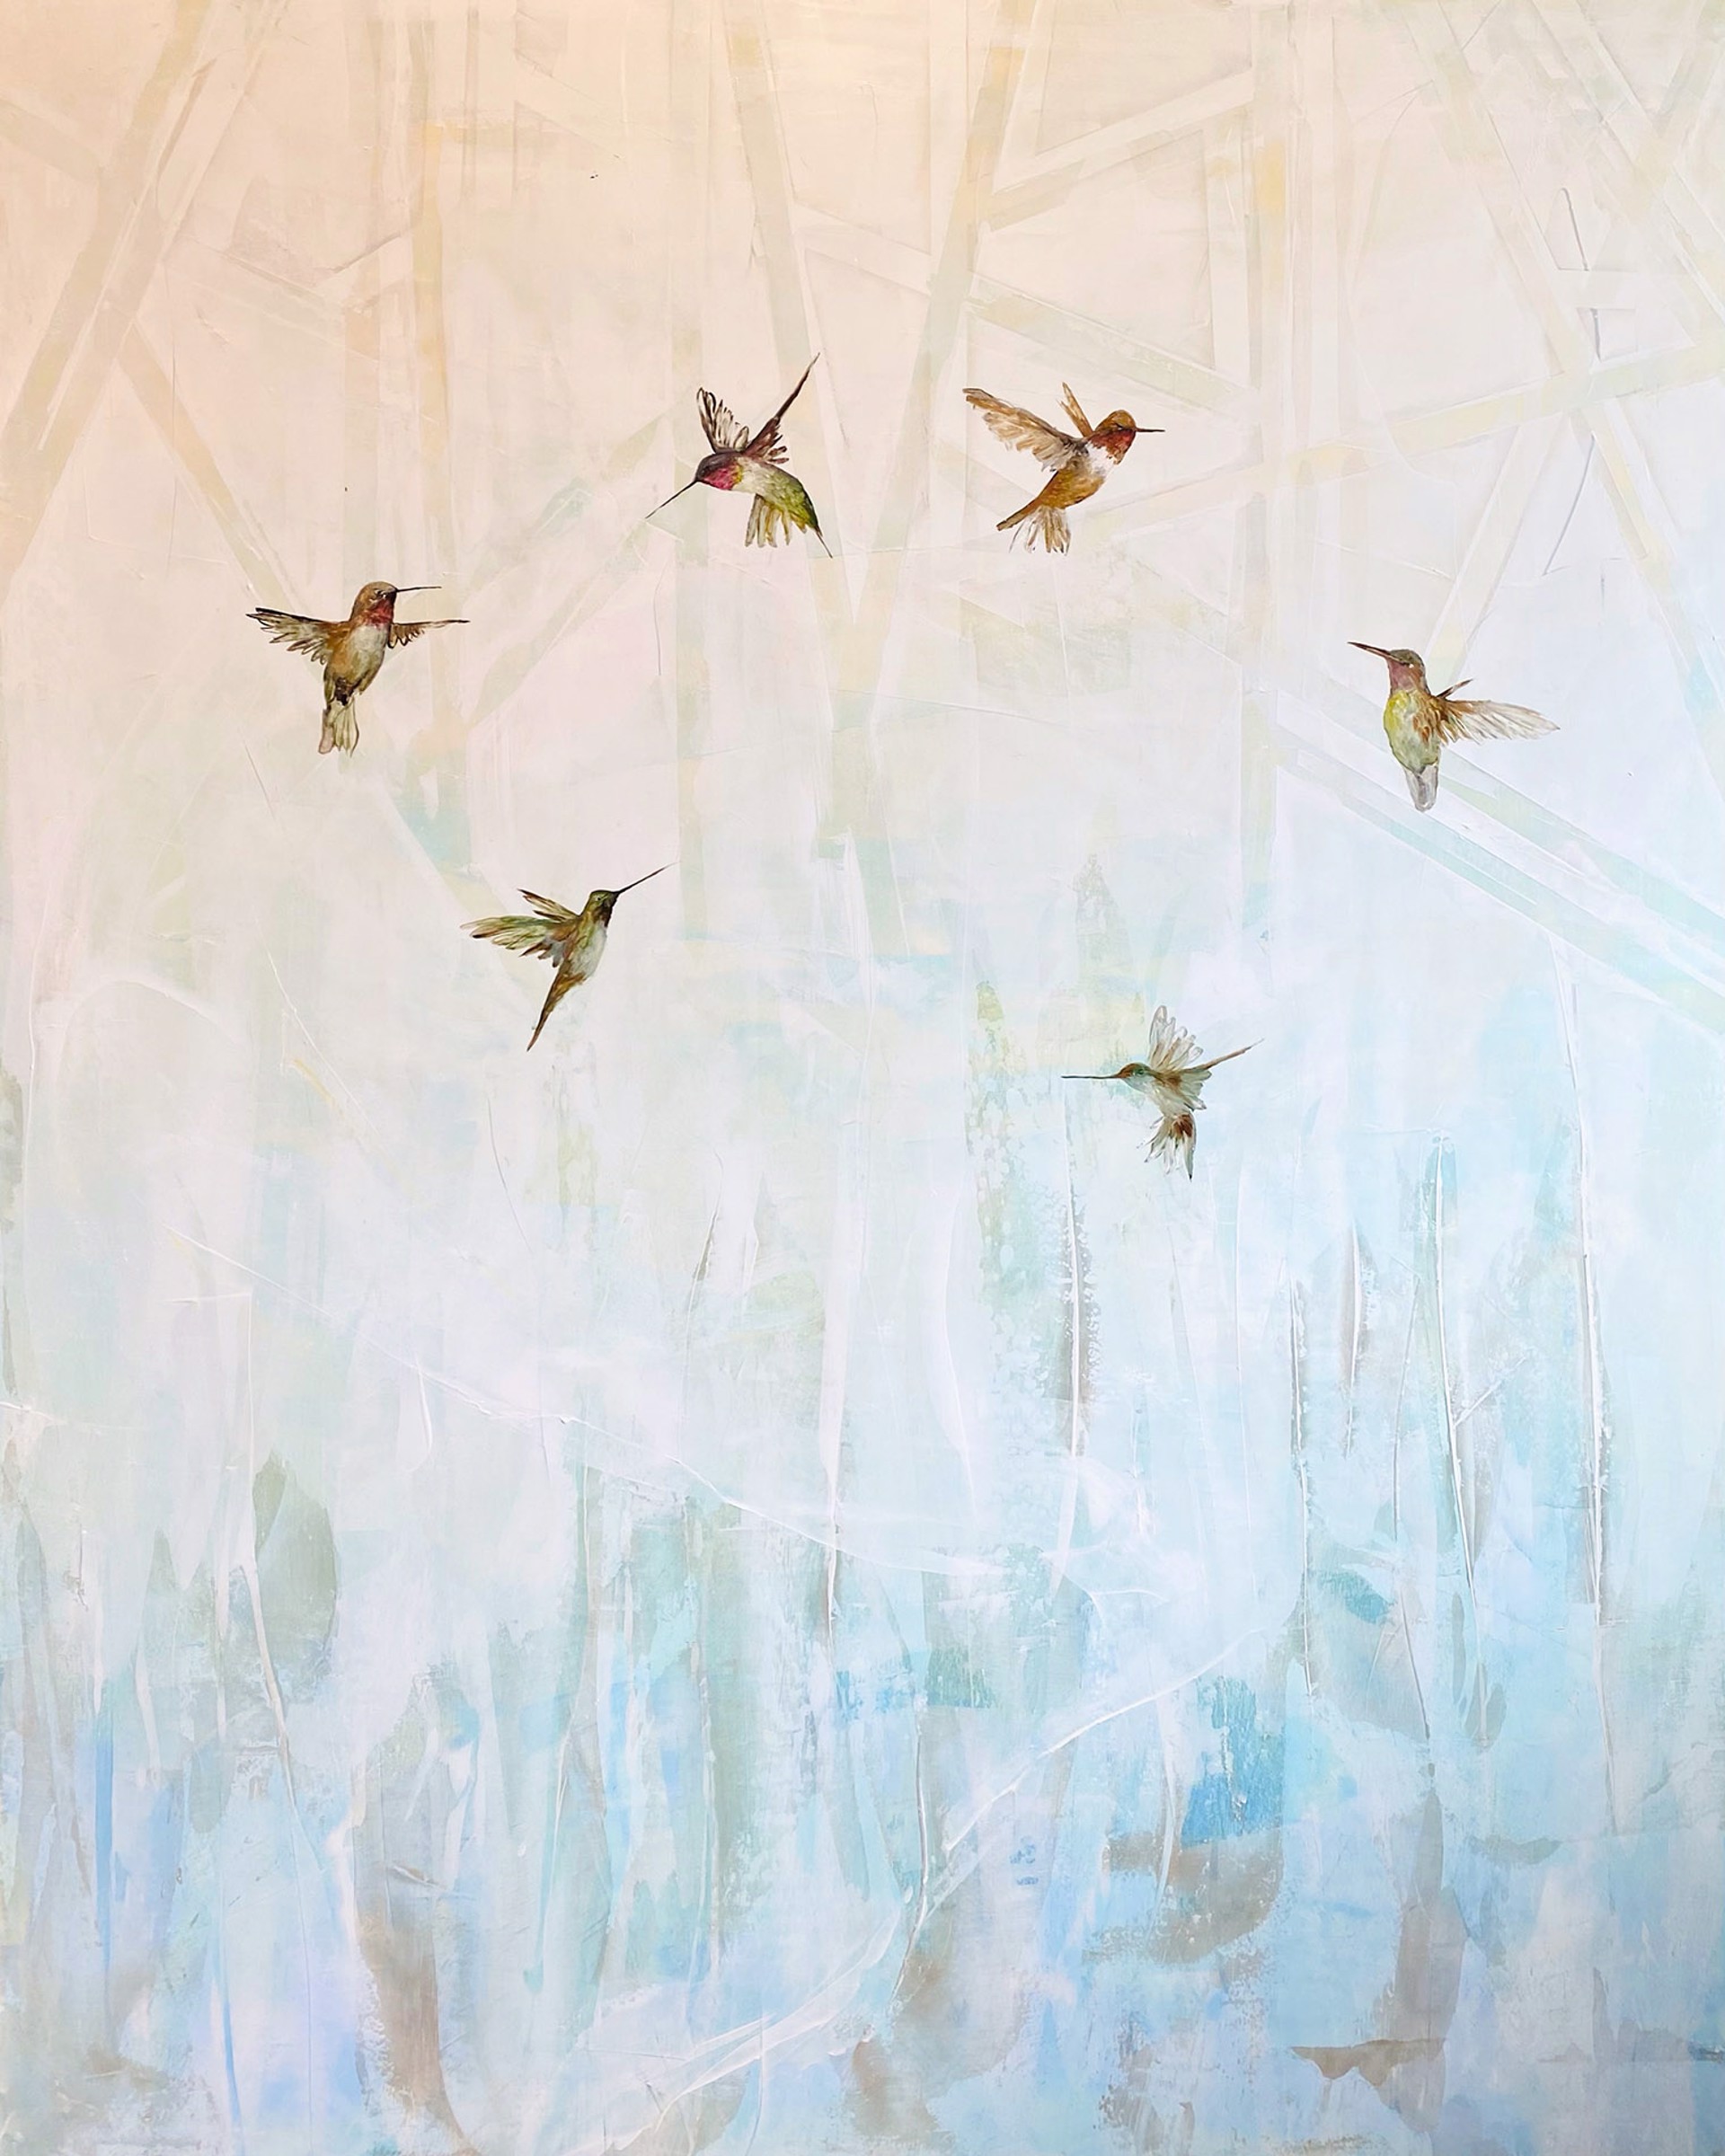 A Contemporary Painting Of Six Hummingbirds On A Blue And Peach Abstract Background By Jenna Von Benedikt At Gallery Wild